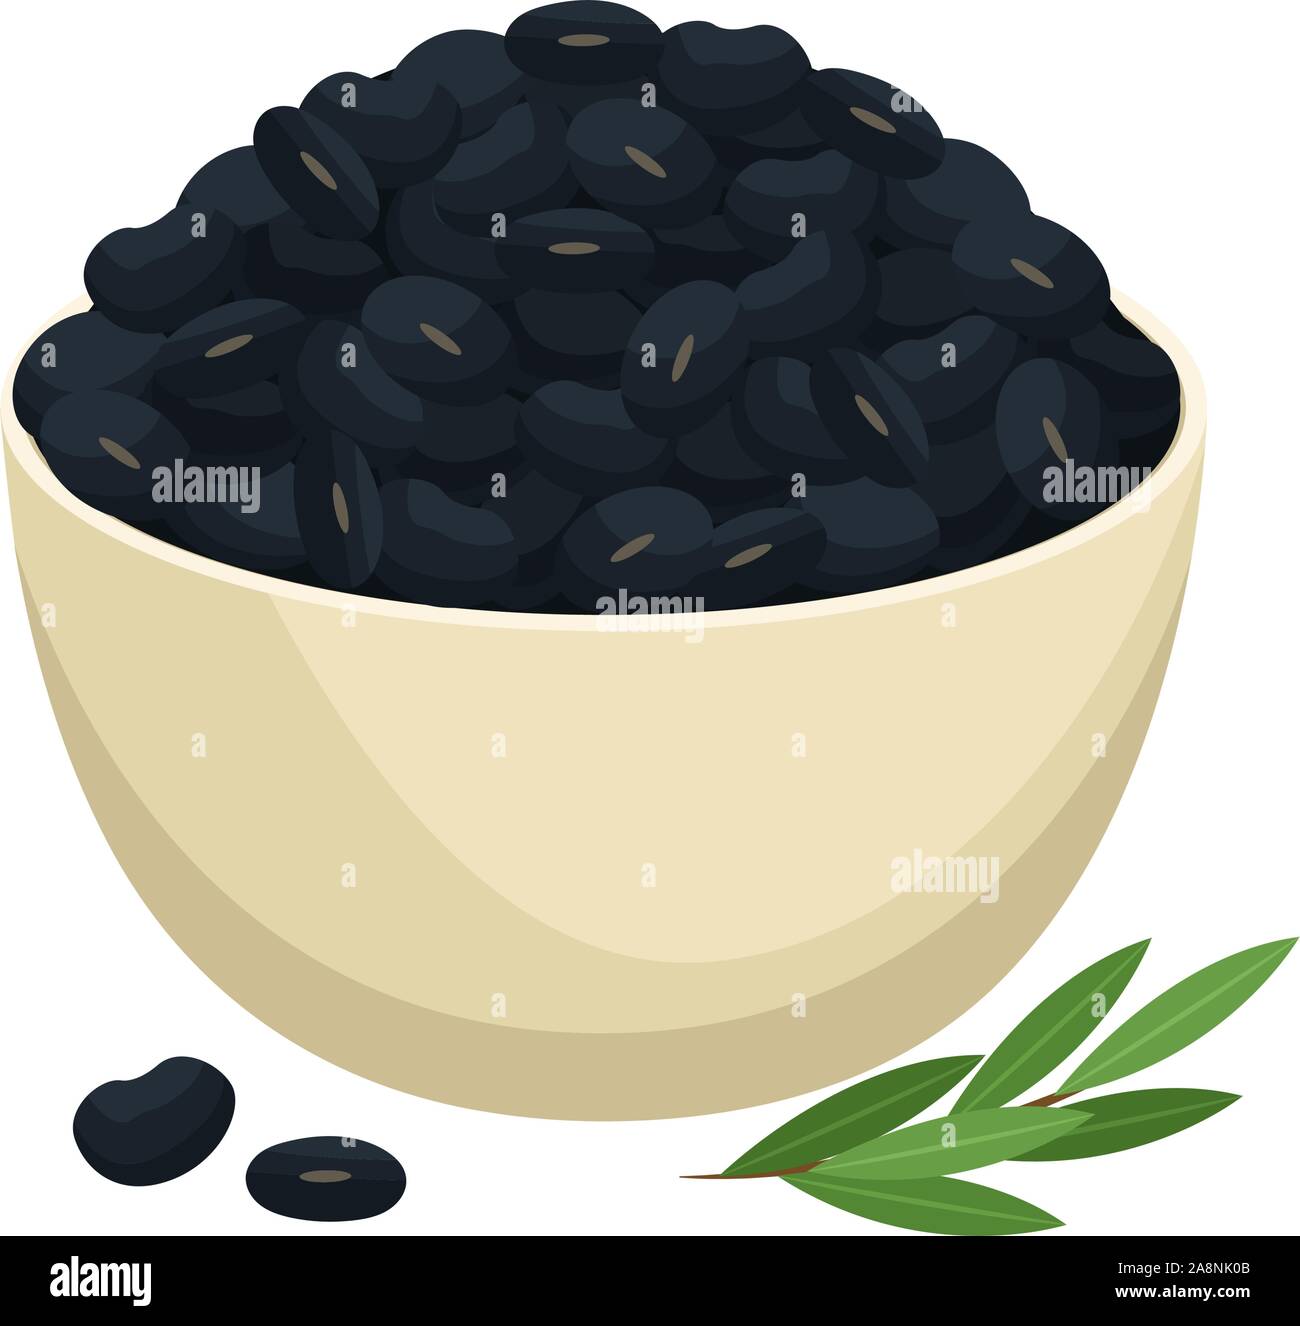 Black beans on a plate. New year's dishes. Asian tradition. Vector illustration. Stock Vector